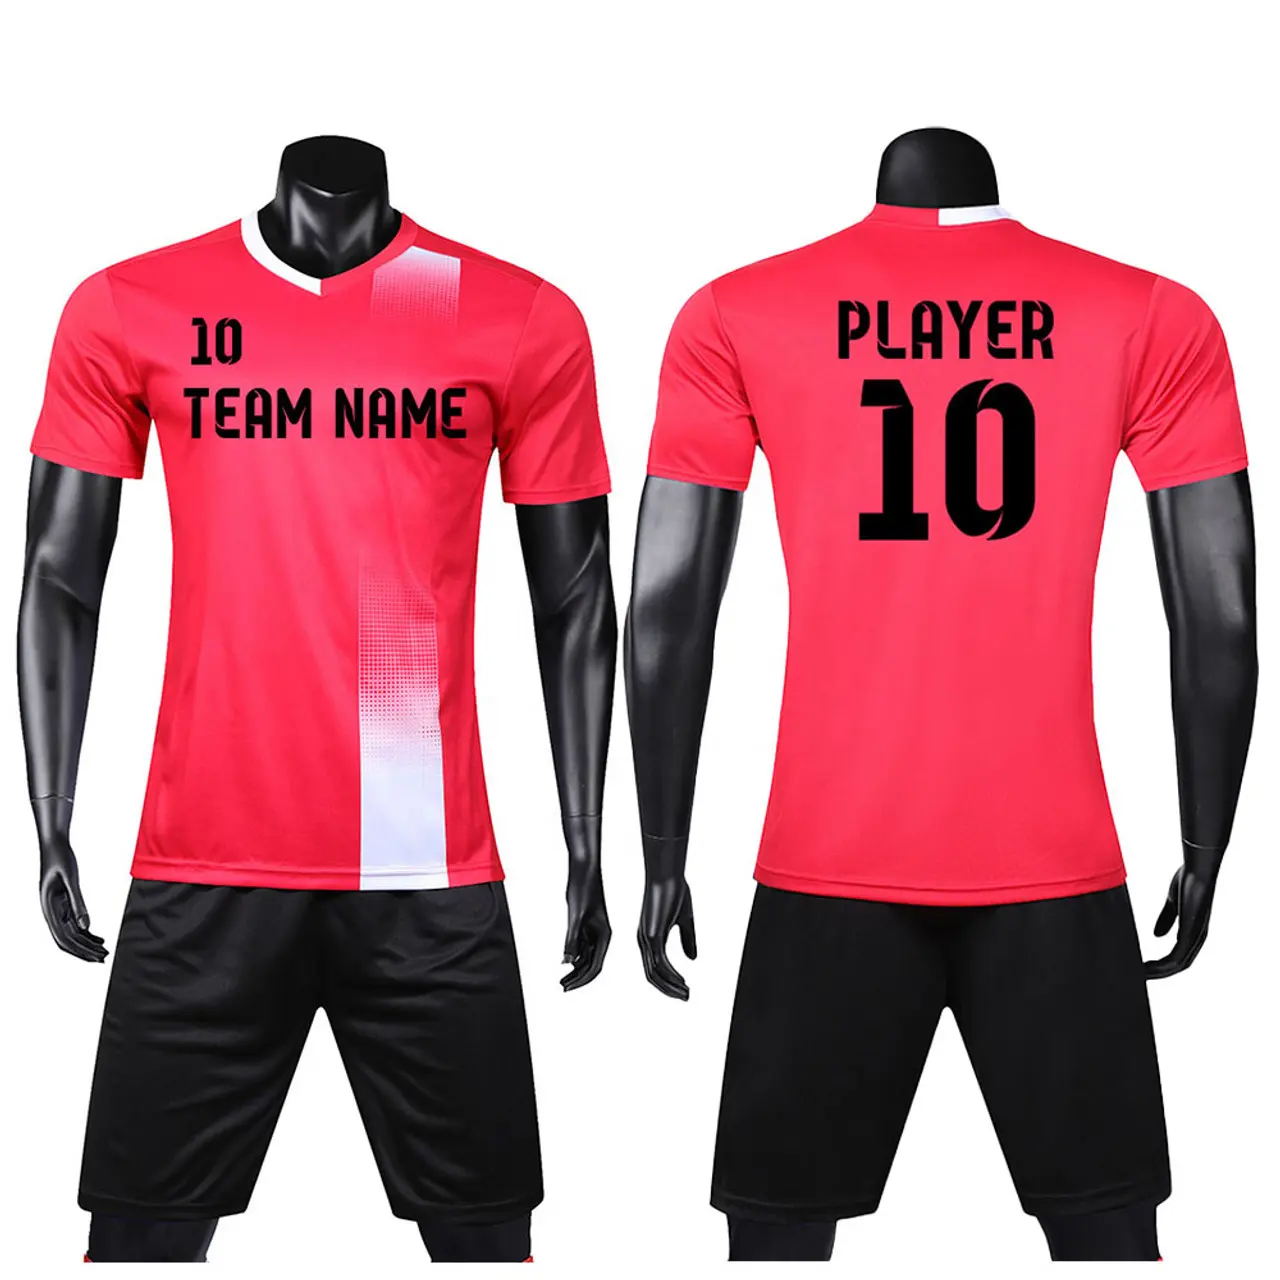 Sublimation Printed New Design Soccer Uniforms Unisex Football Shirts and Shorts Full Kit with Custom Team Name Logo and Number